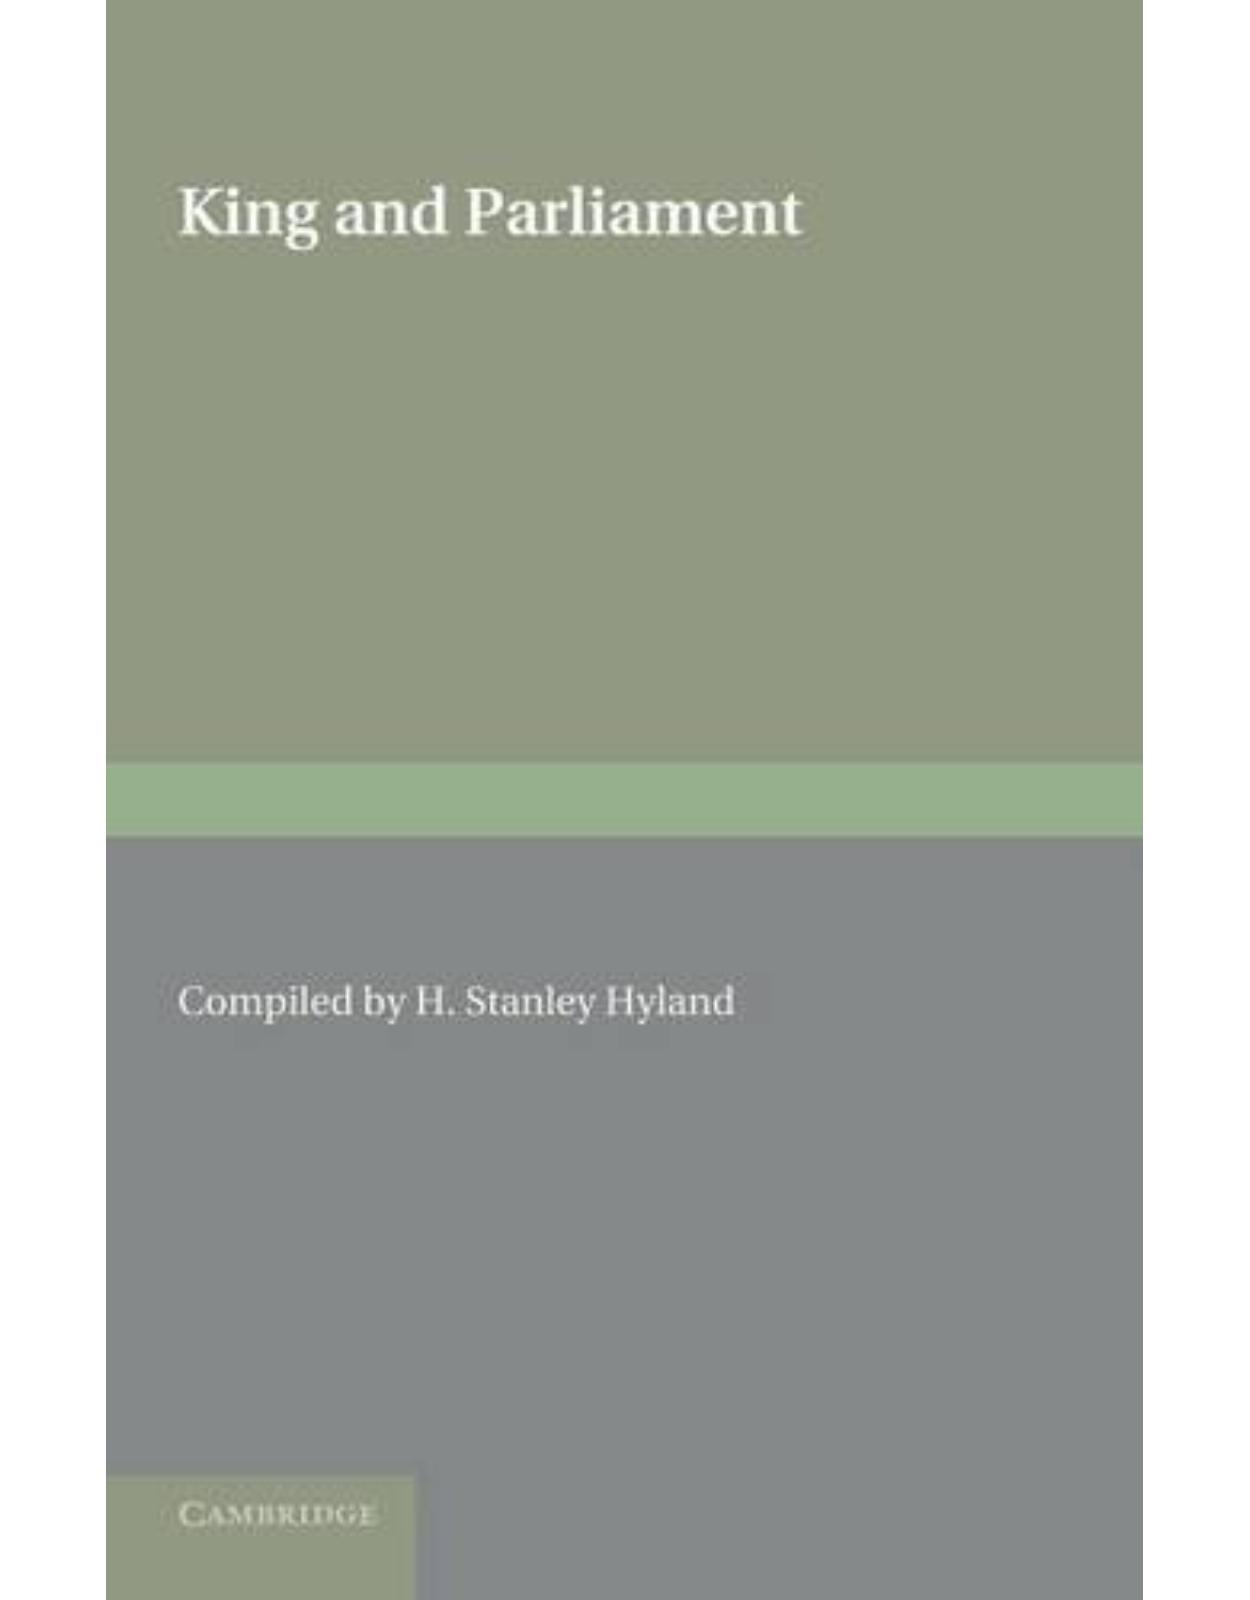 King and Parliament (National Book League Readers' Guides) 